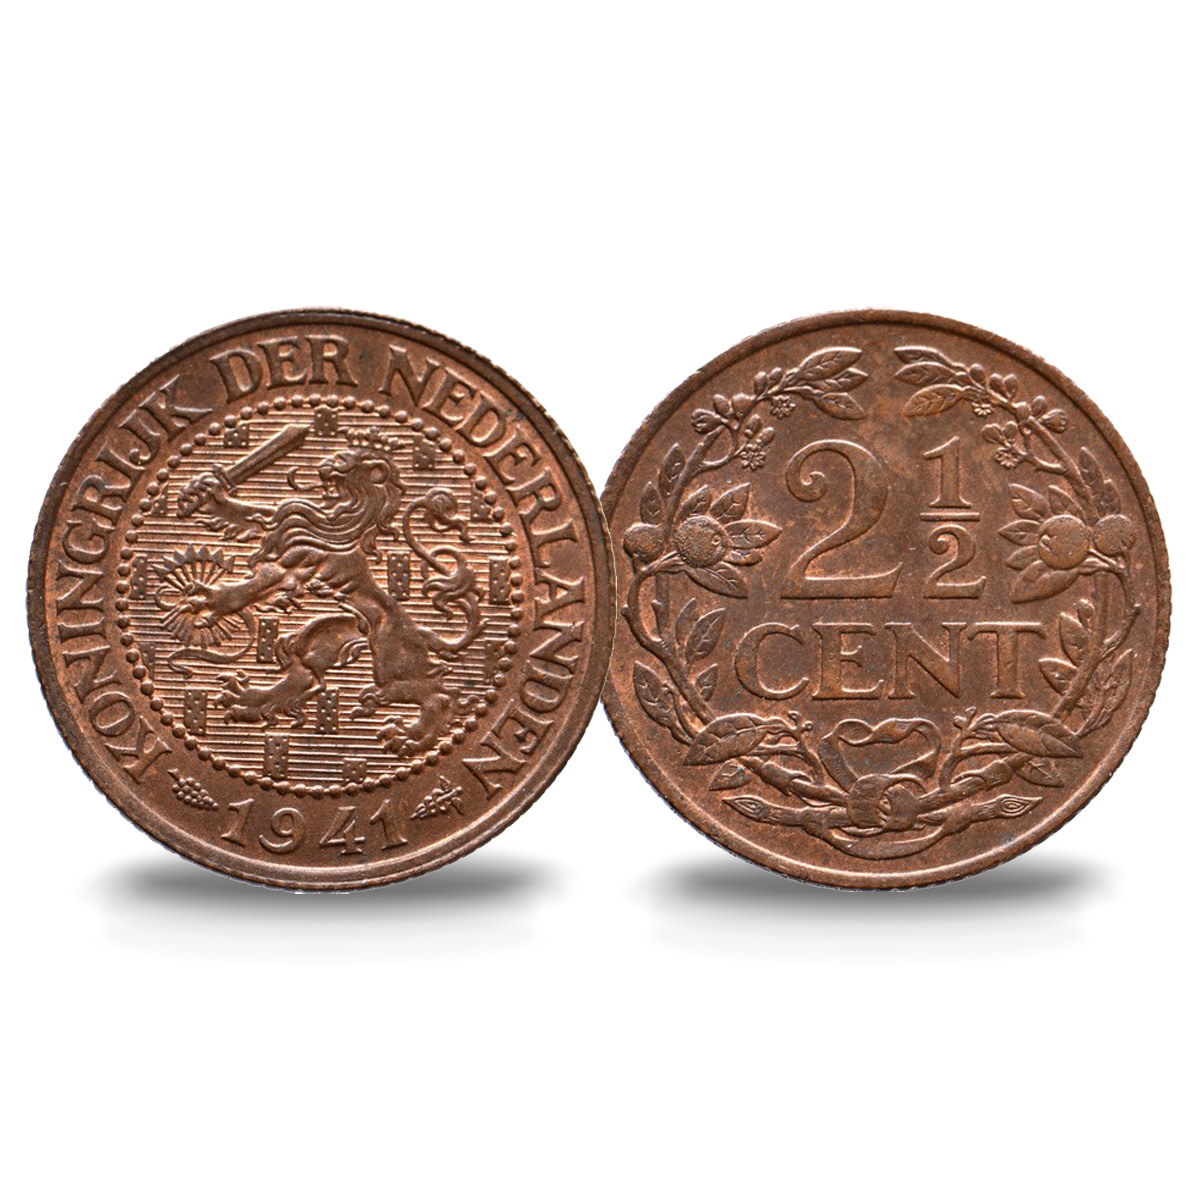 From a type out of circulation for 80 years this is the last issued date of the Netherlands bronze 2 1/2 cents, featured in a special 80 Years coin card issued through the Royal Dutch Mint website at the end of October 2021.